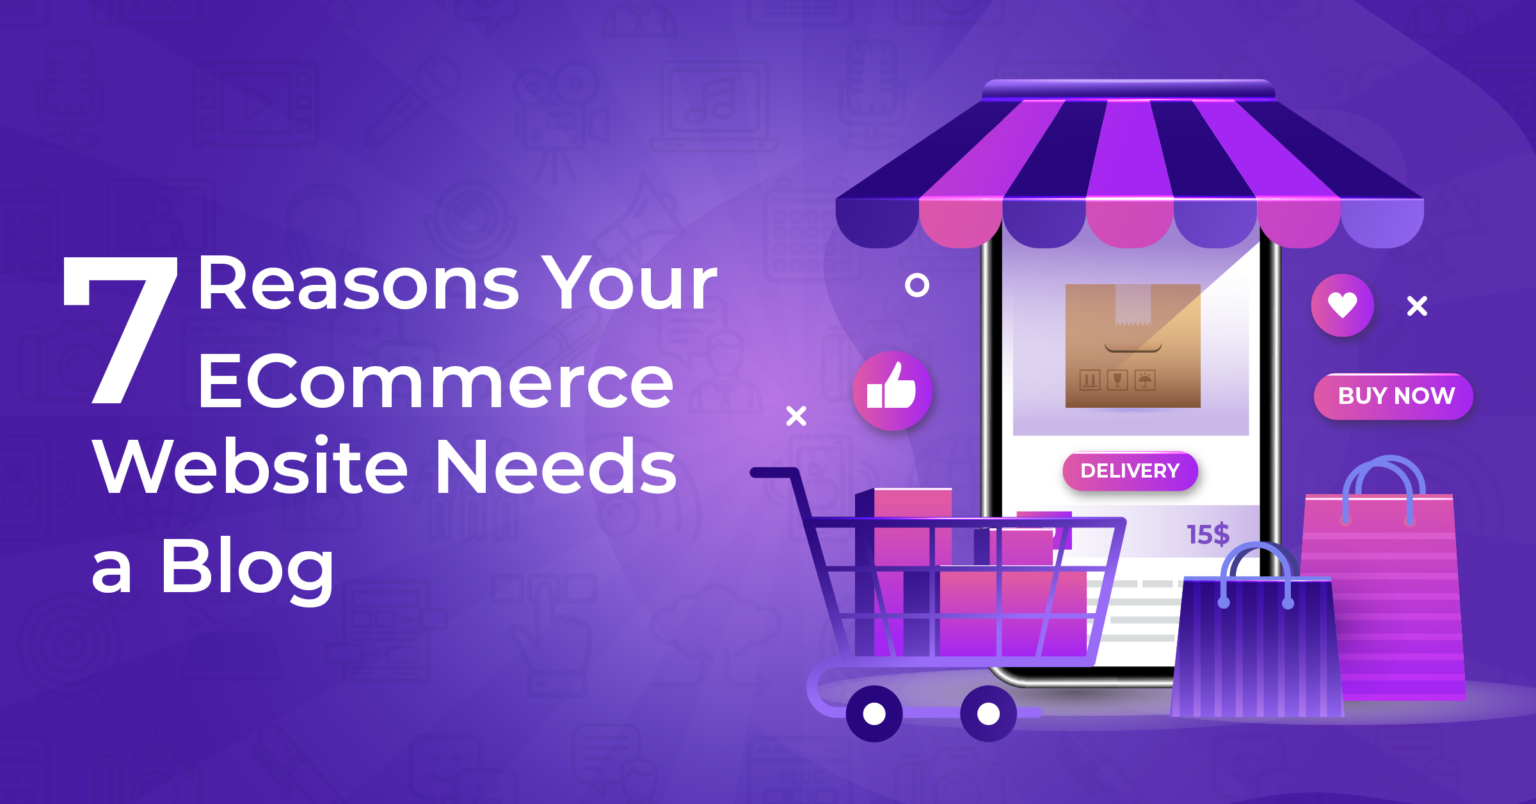 Web banner for our blog 7 reasons your E-commerce website needs a blog